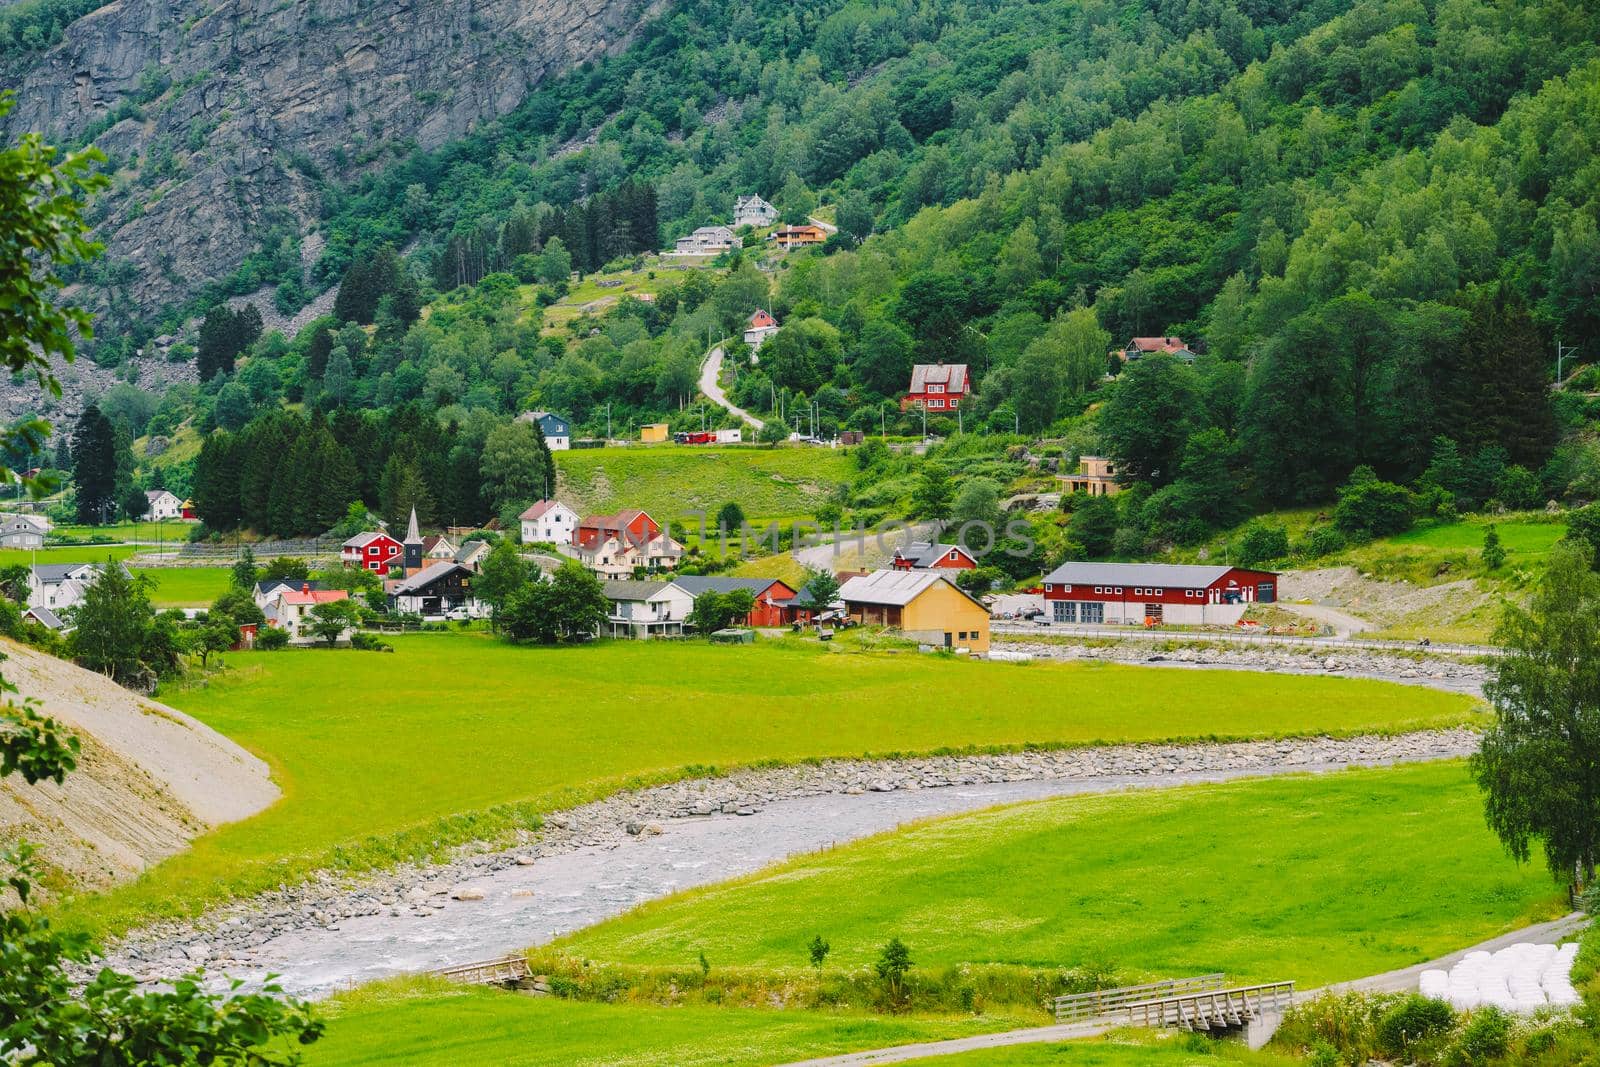 Norway mountain landscape with country houses. Aerial view of the Norwegian village Flam. village of Flam laying on the banks of the river Flam in Norway.